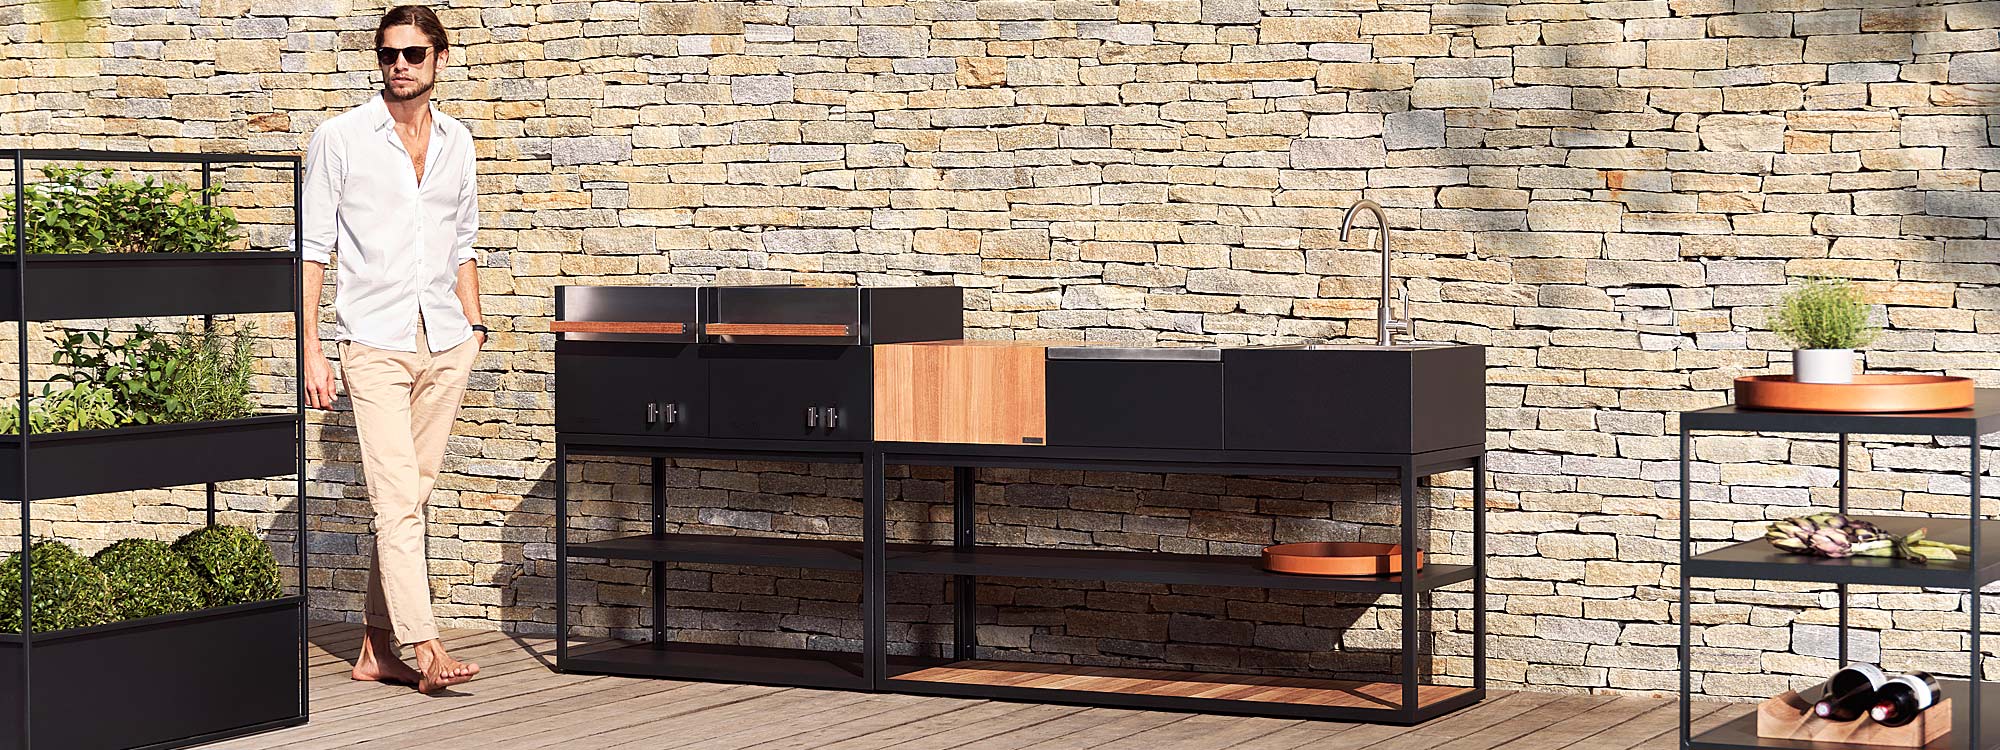 Image of dude in sunglasses stood next to Roshults Open Kitchen modern outdoor kitchen island in anthracite coloured stainless steel and teak, shown in sunny courtyard